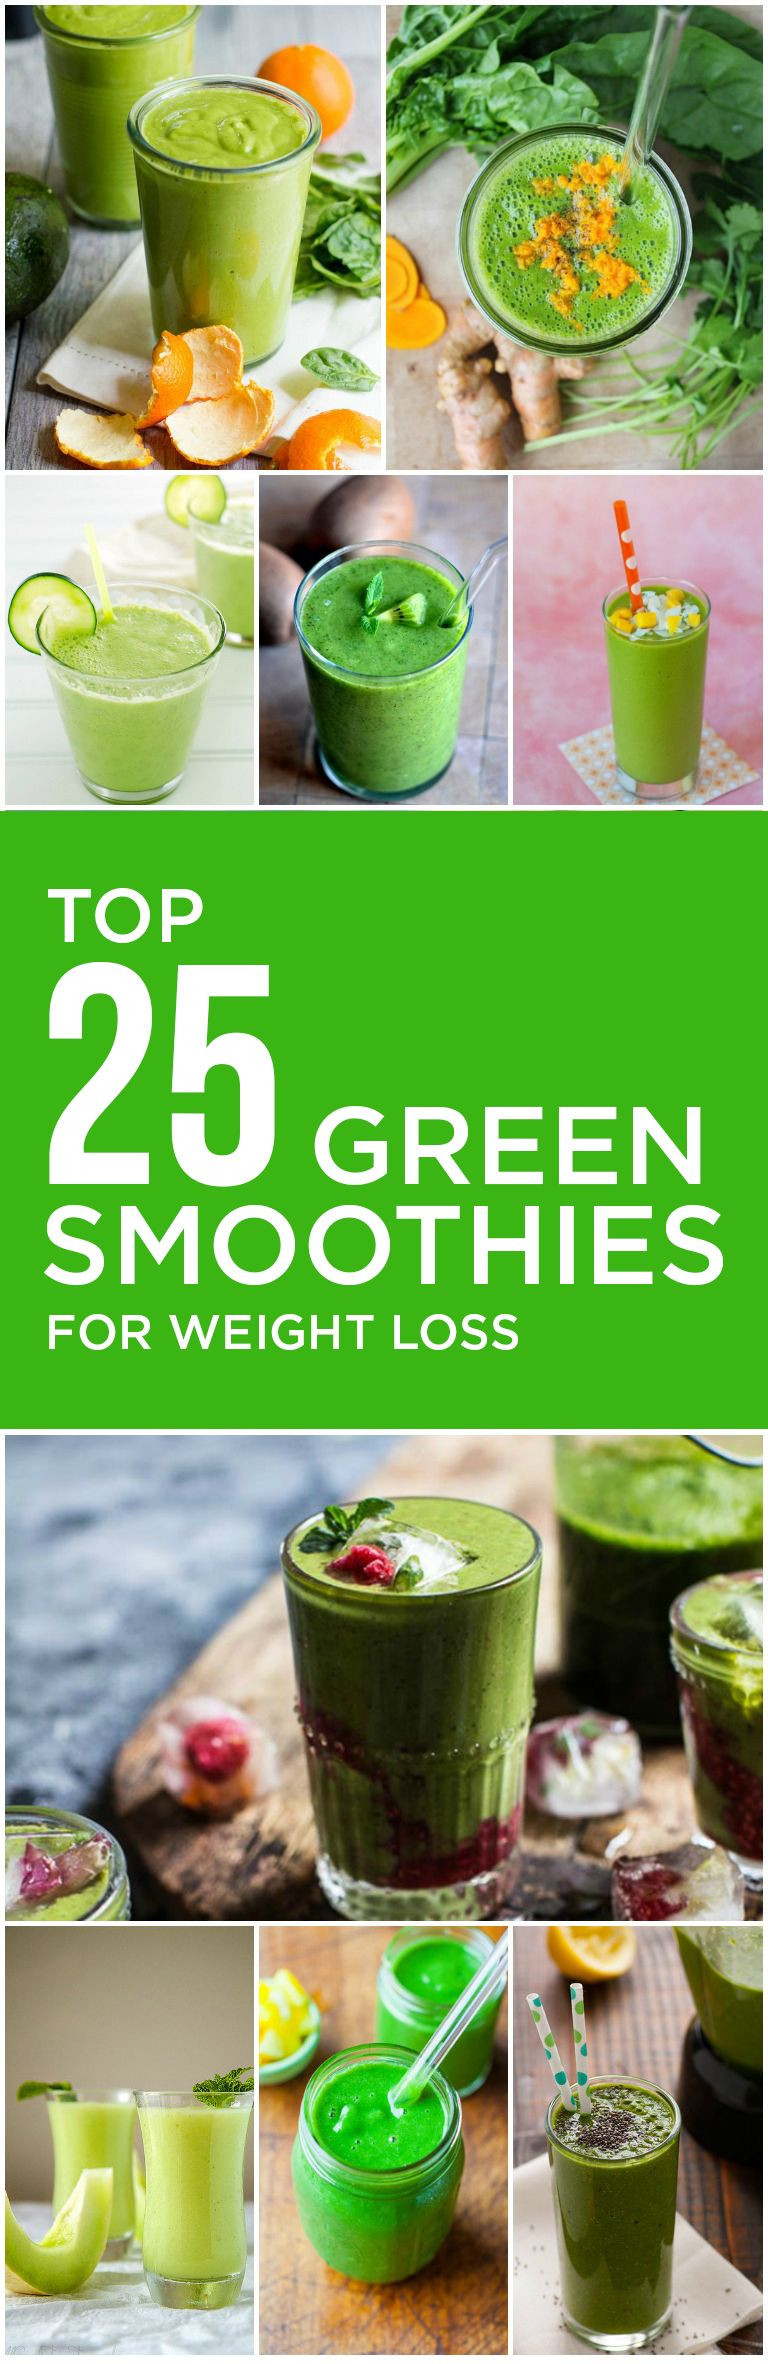 Best Fruit Smoothies For Weight Loss
 Pin on Healthy Food